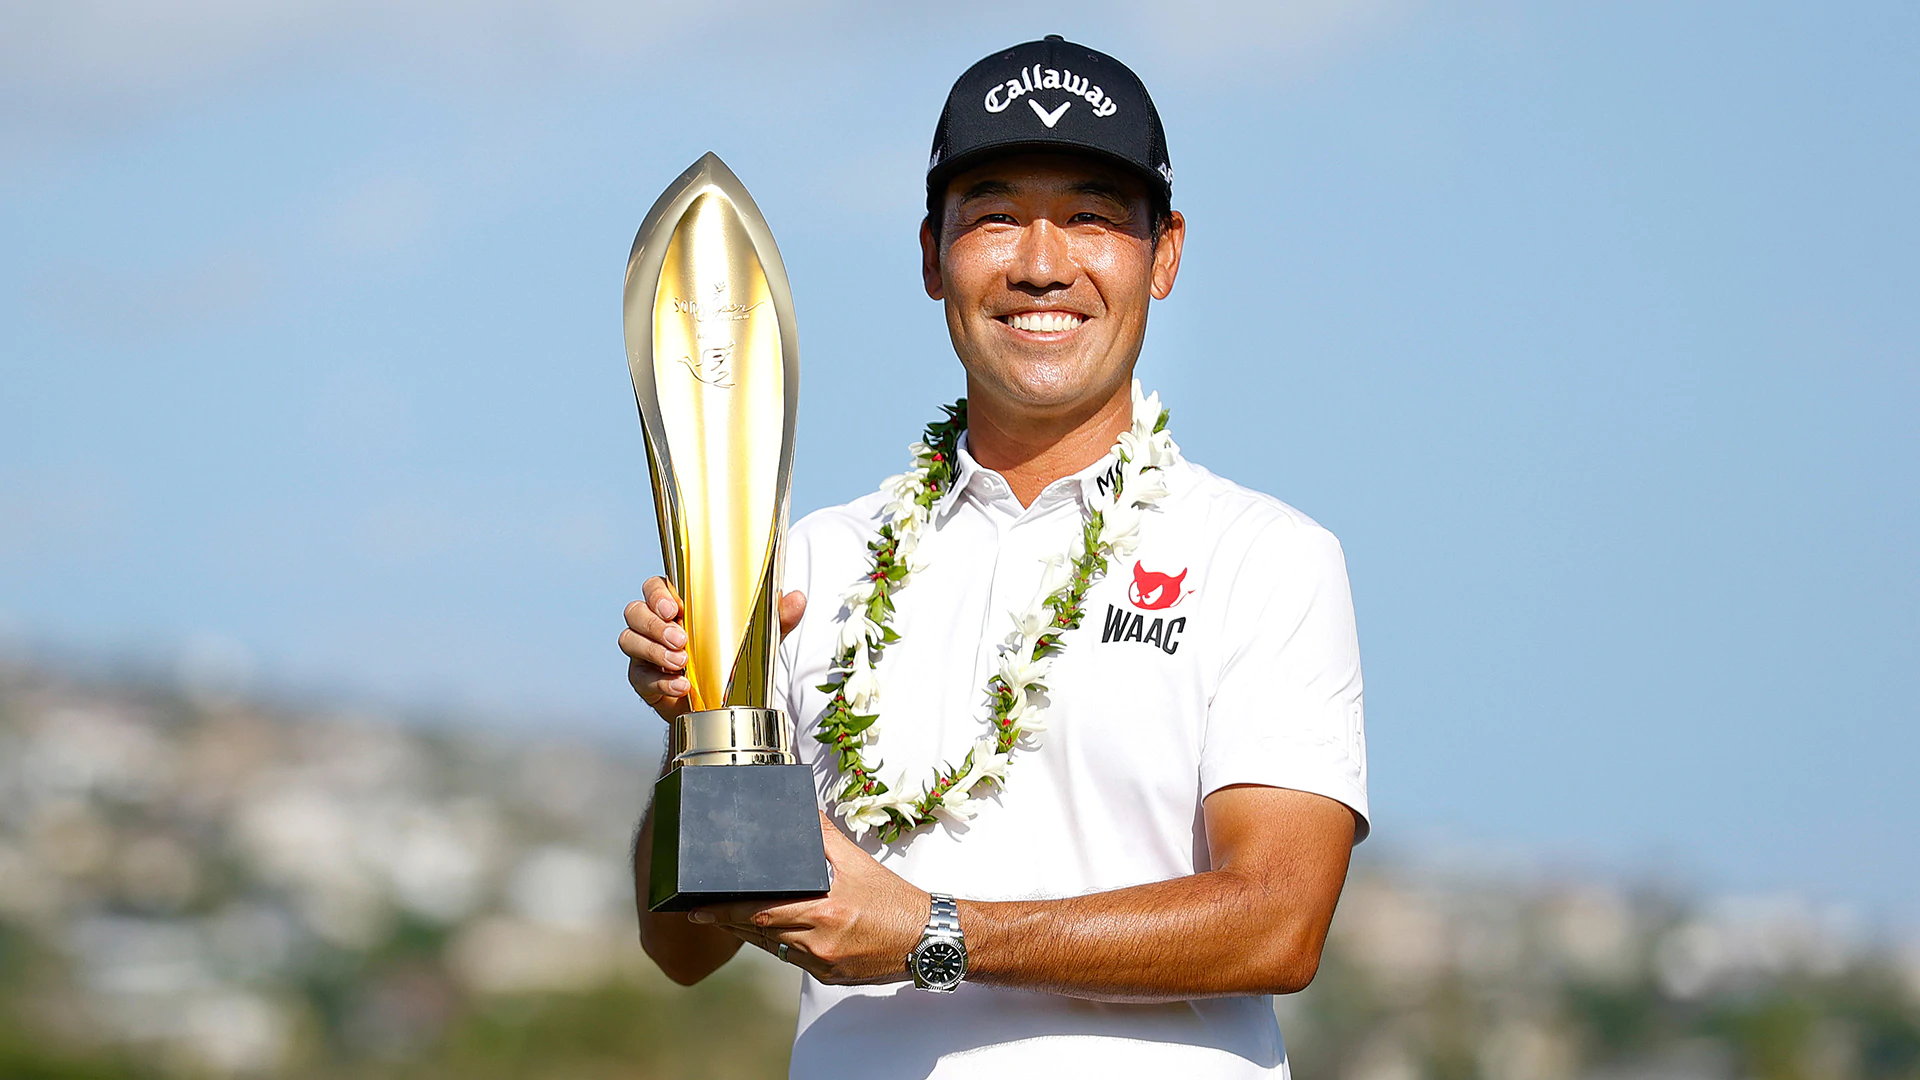 Kevin Na wins the 2021 Sony Open